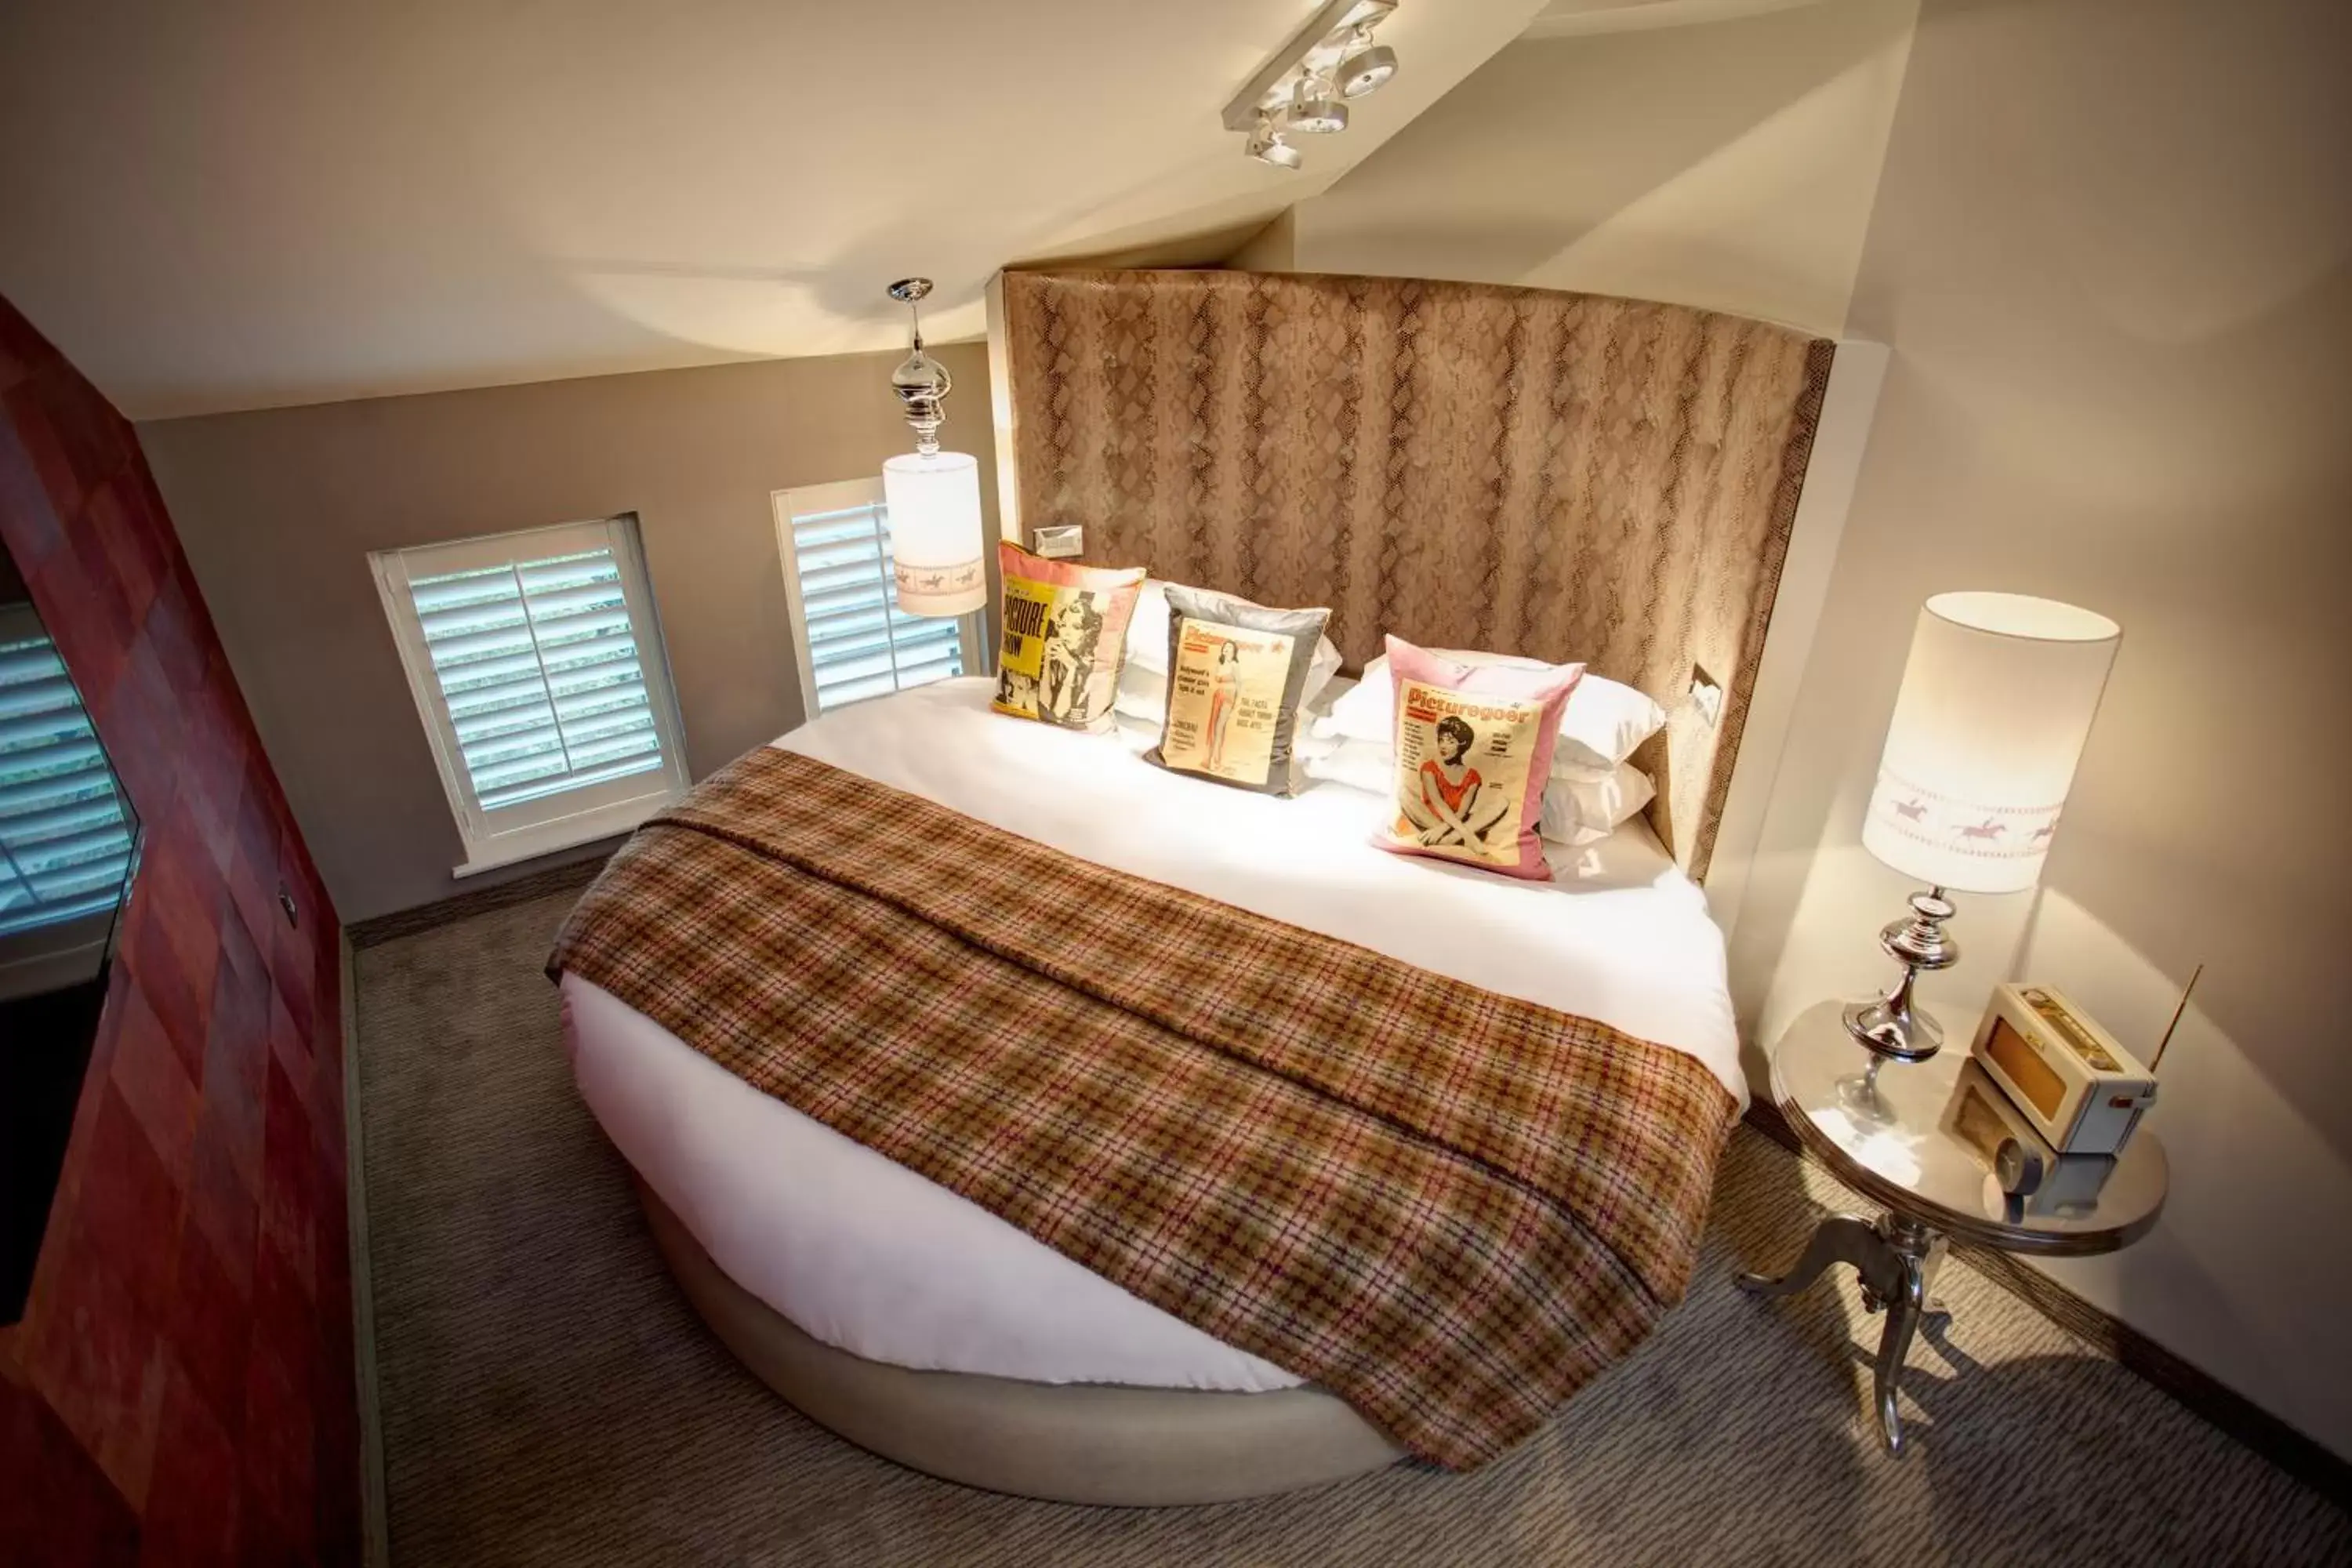 The Newbrook Luxury Double in Oddfellows Chester Hotel & Apartments